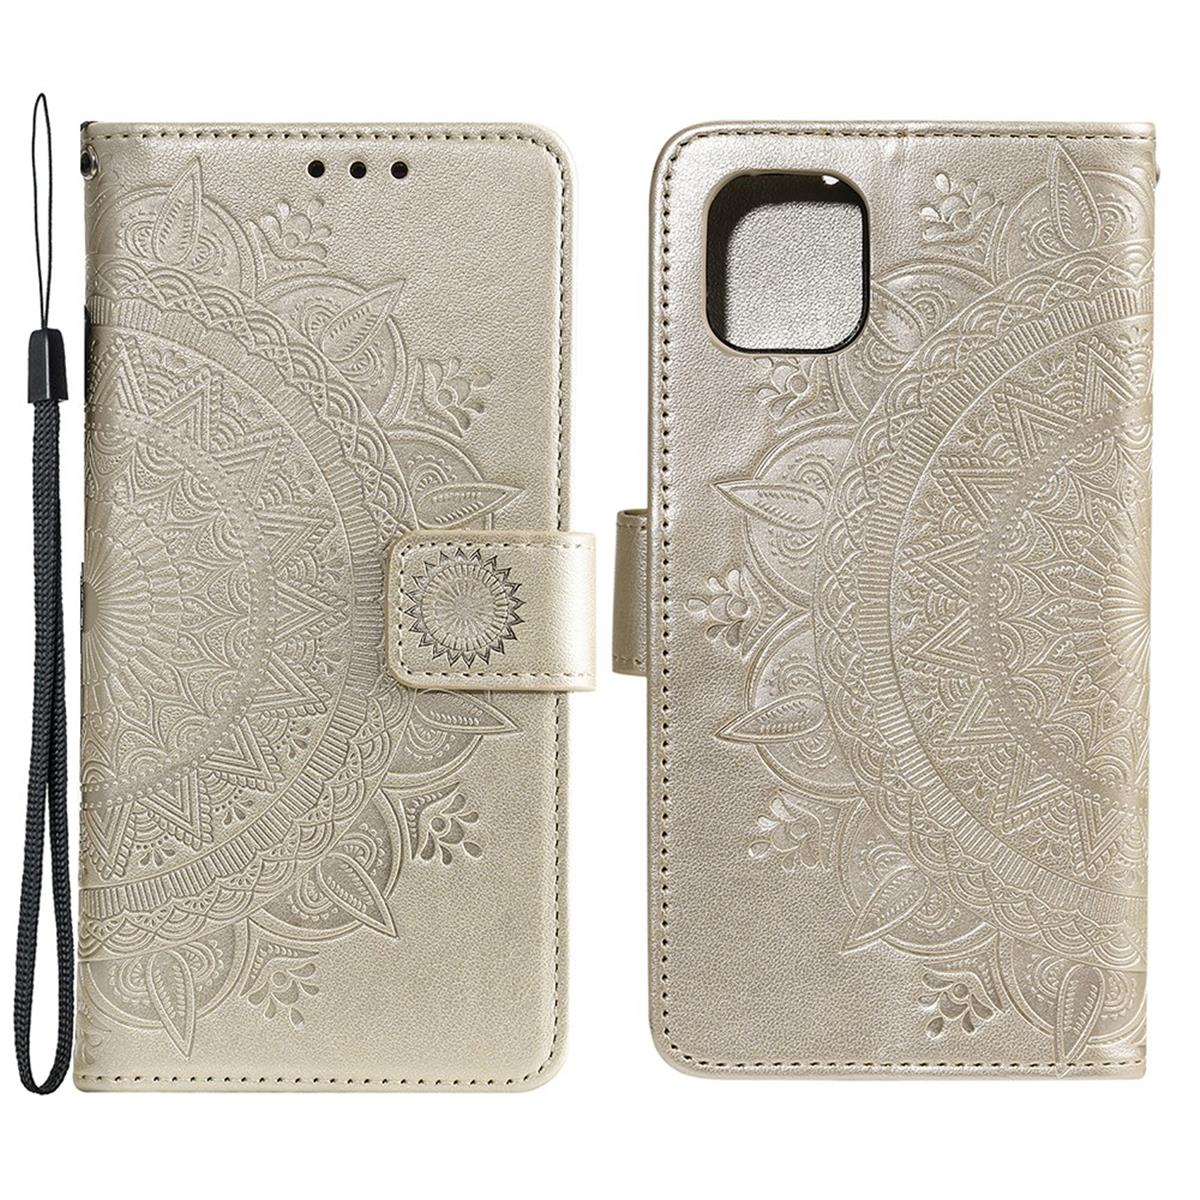 COVERKINGZ 13 Klapphülle Muster, iPhone mit Bookcover, Mandala Pro, Gold Apple,